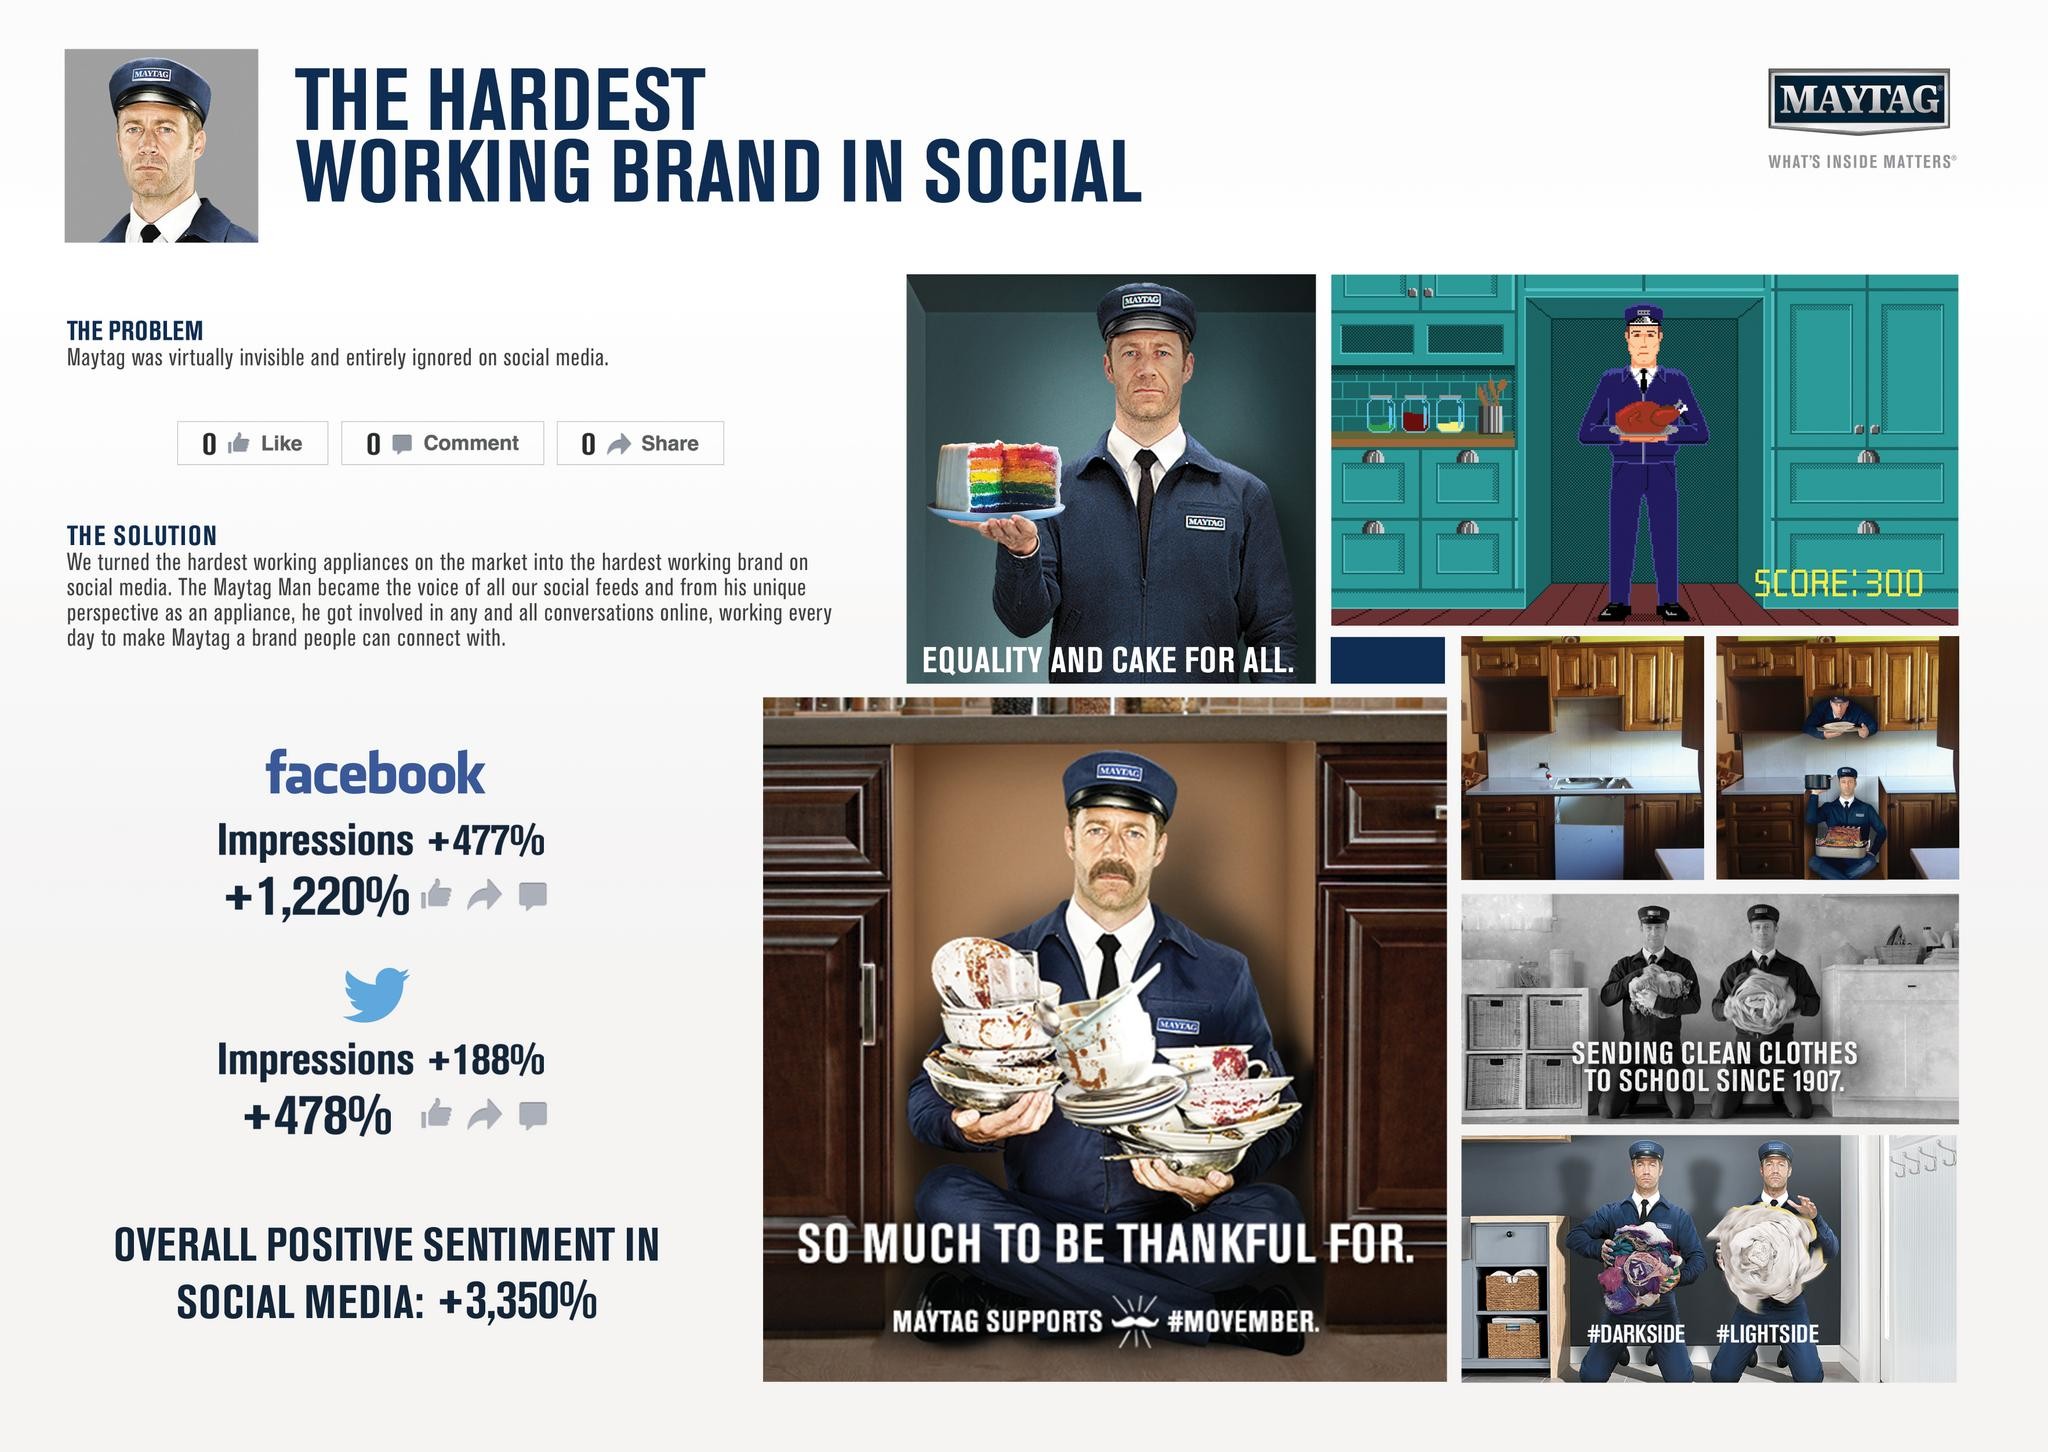 Maytag, The Hardest Working Brand in Social